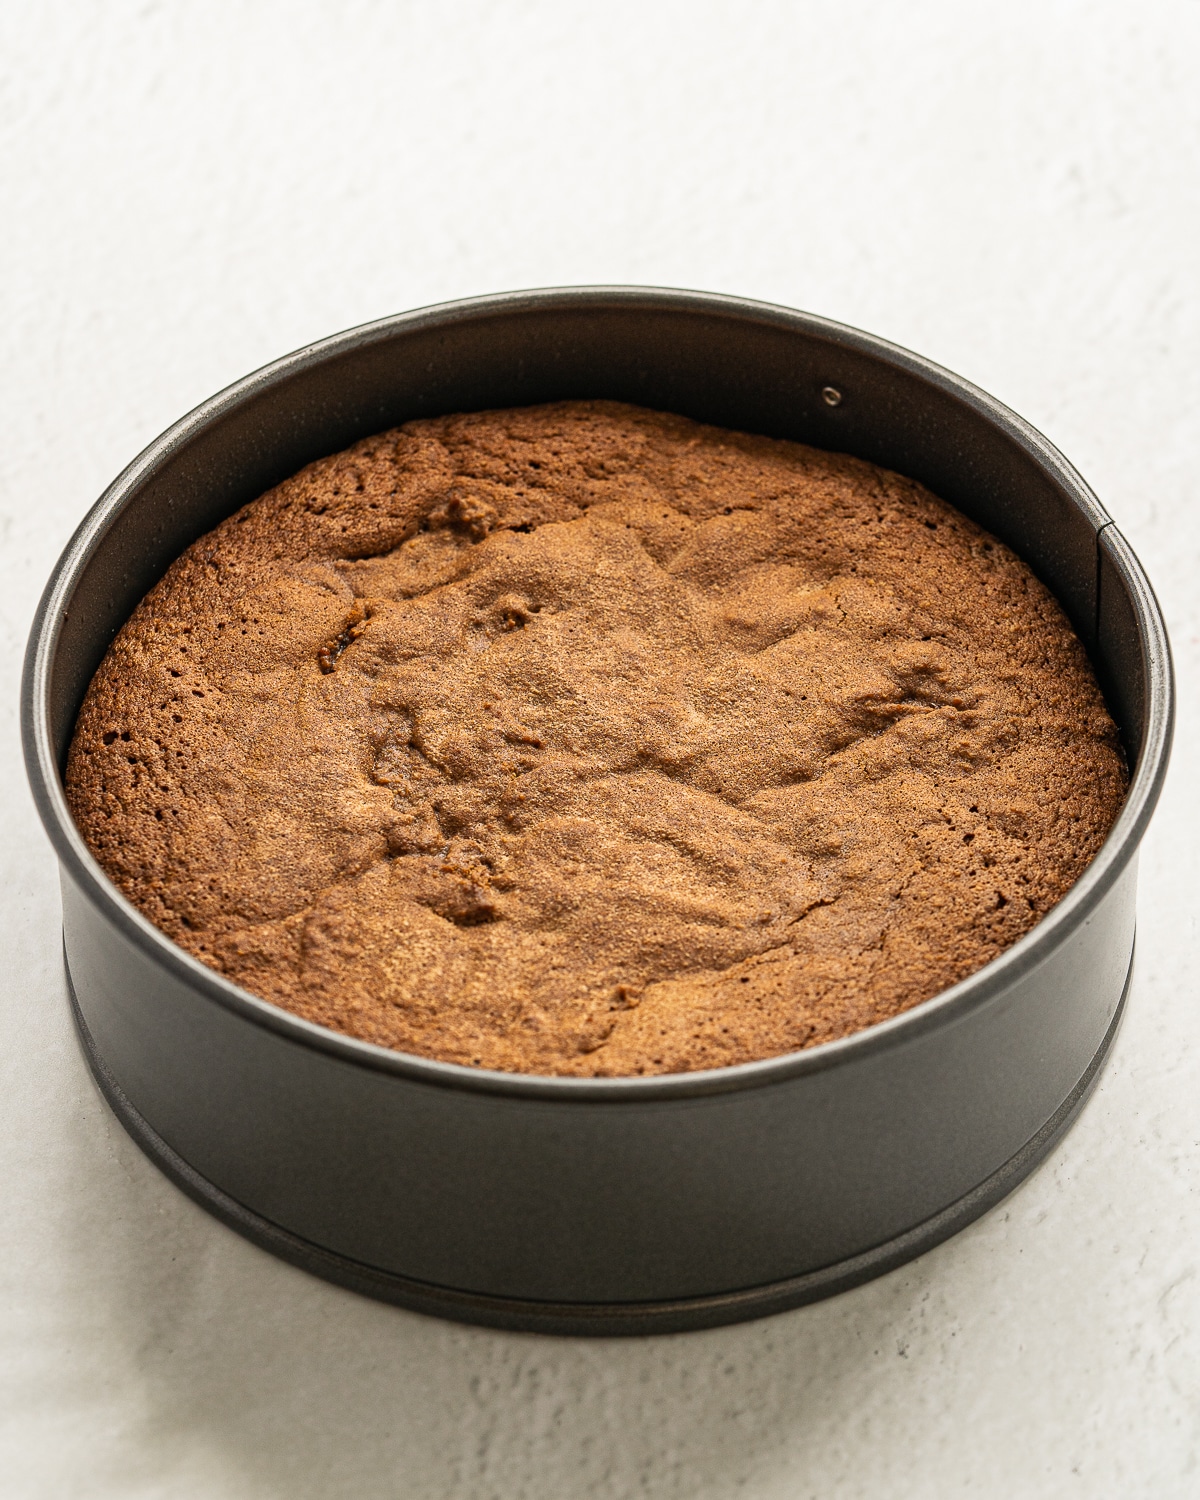 Picture of cooked cake in a cake pan.